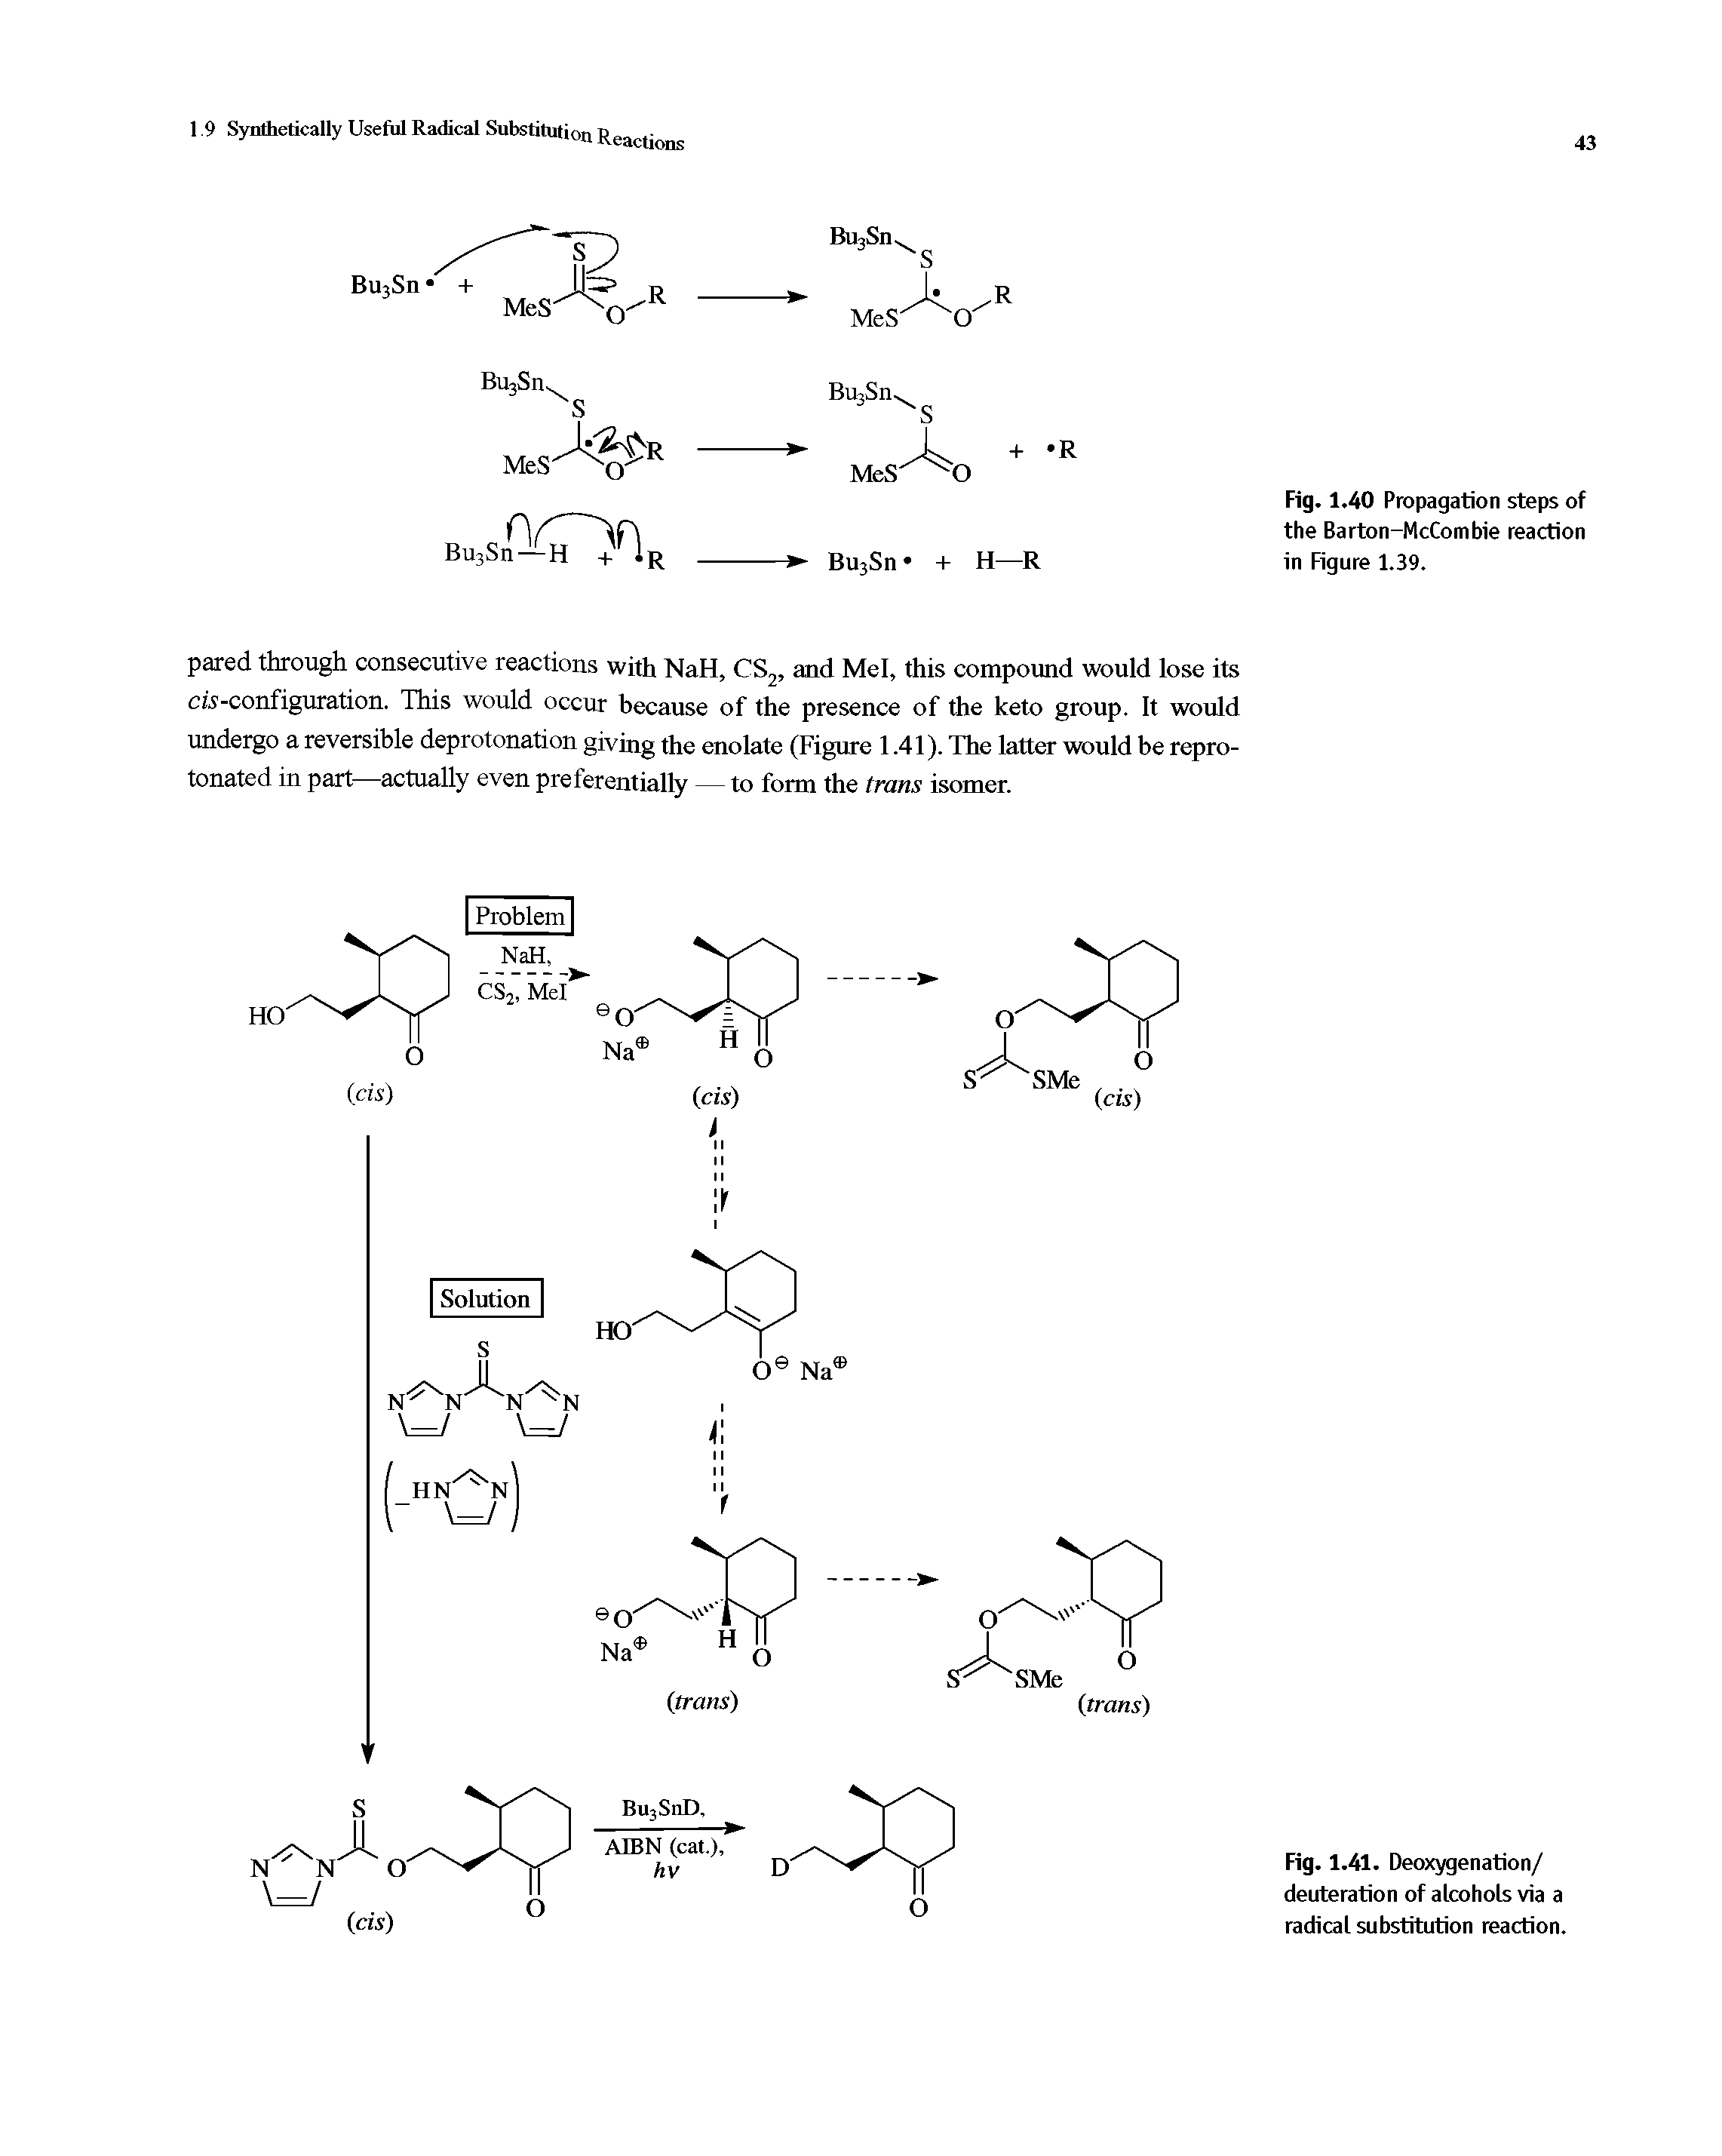 Fig. 1.40 Propagation steps of the Barton-McCombie reaction in Figure 1.39.